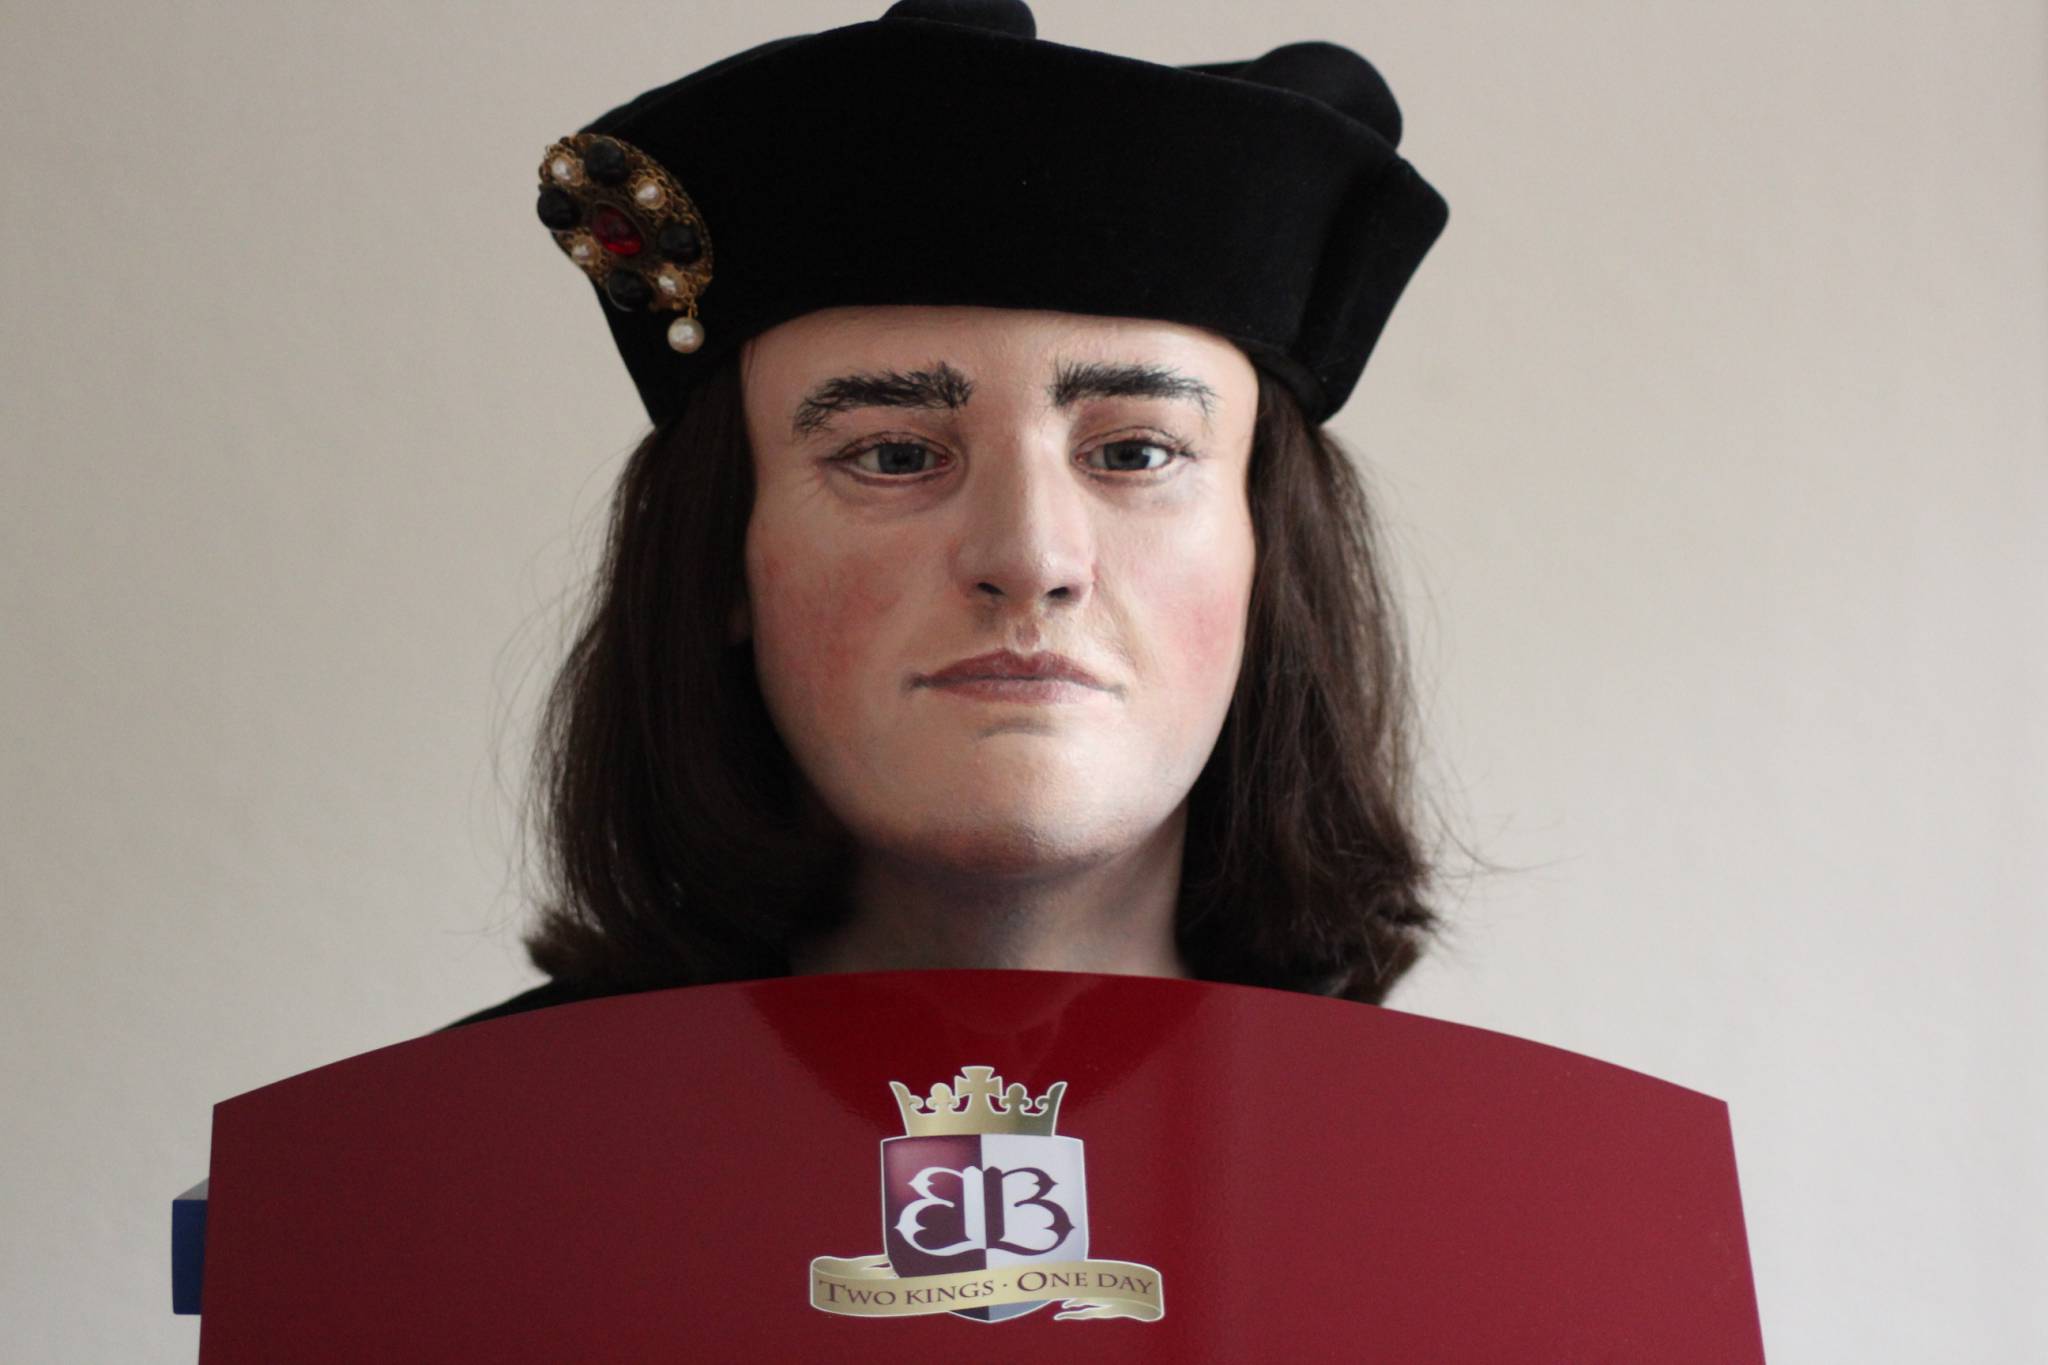 "In the Footsteps of Richard III" Guided Walk - CANCELLED